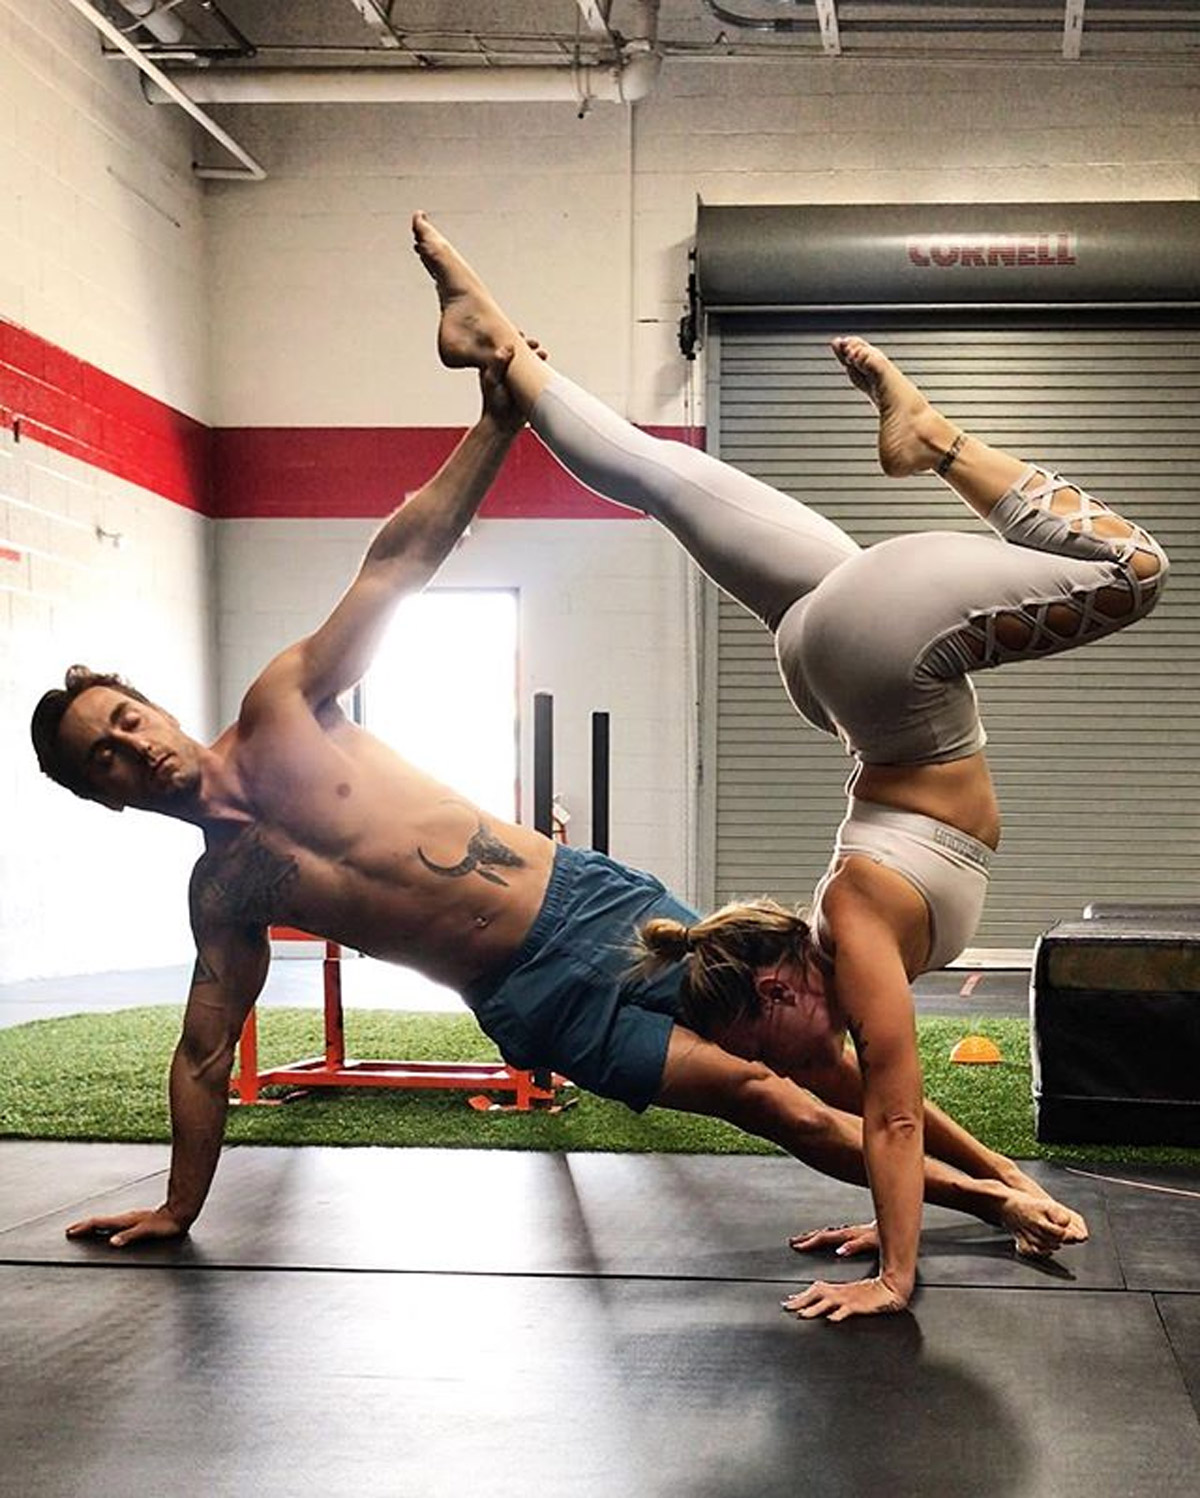 5 Couple Yoga Poses to Strengthen Your Relationship